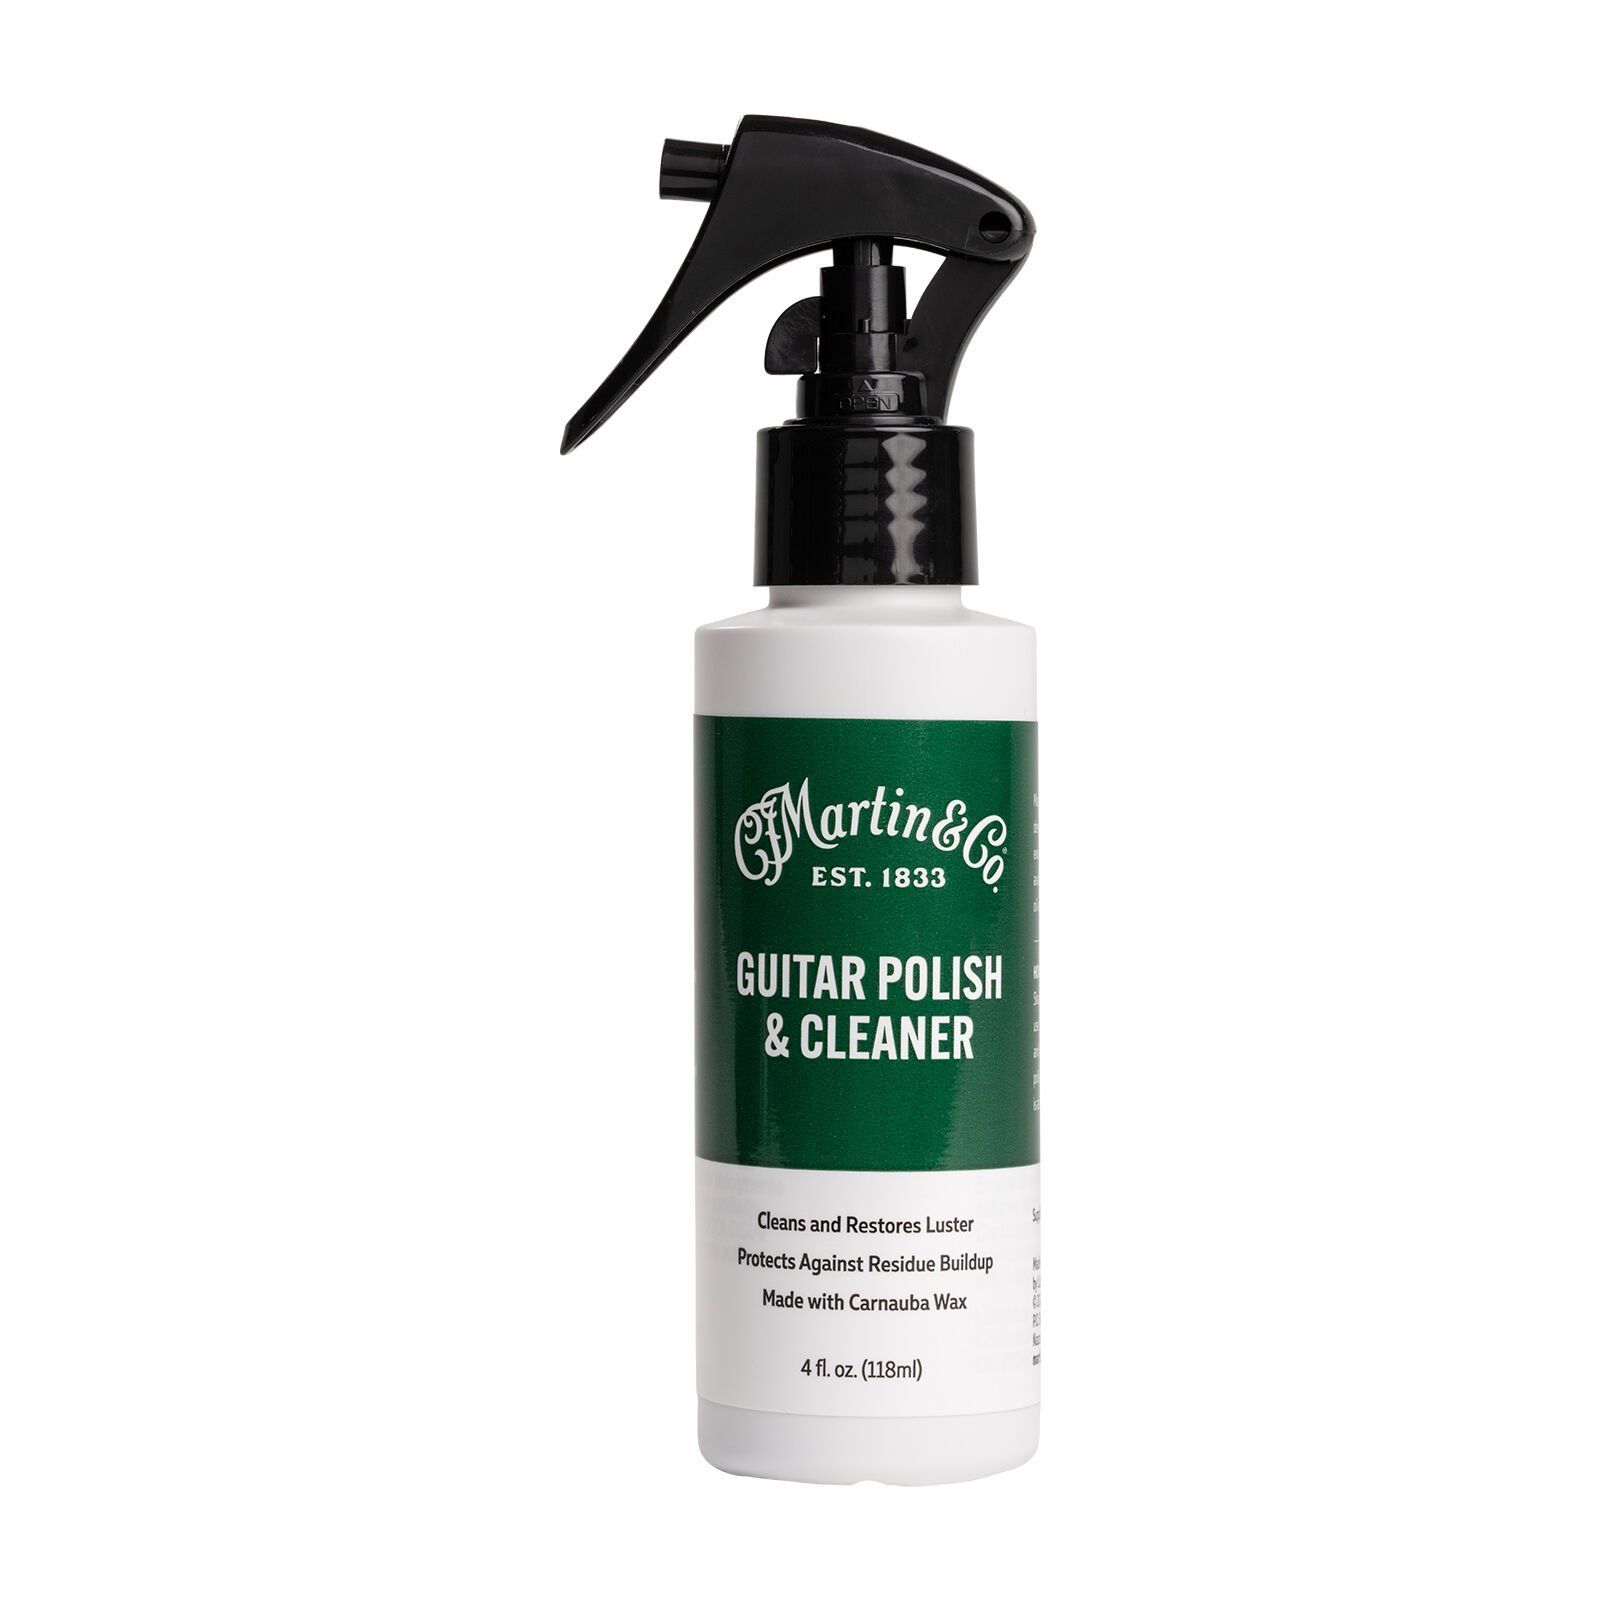 Martin and Co Guitar Polish & Cleaner